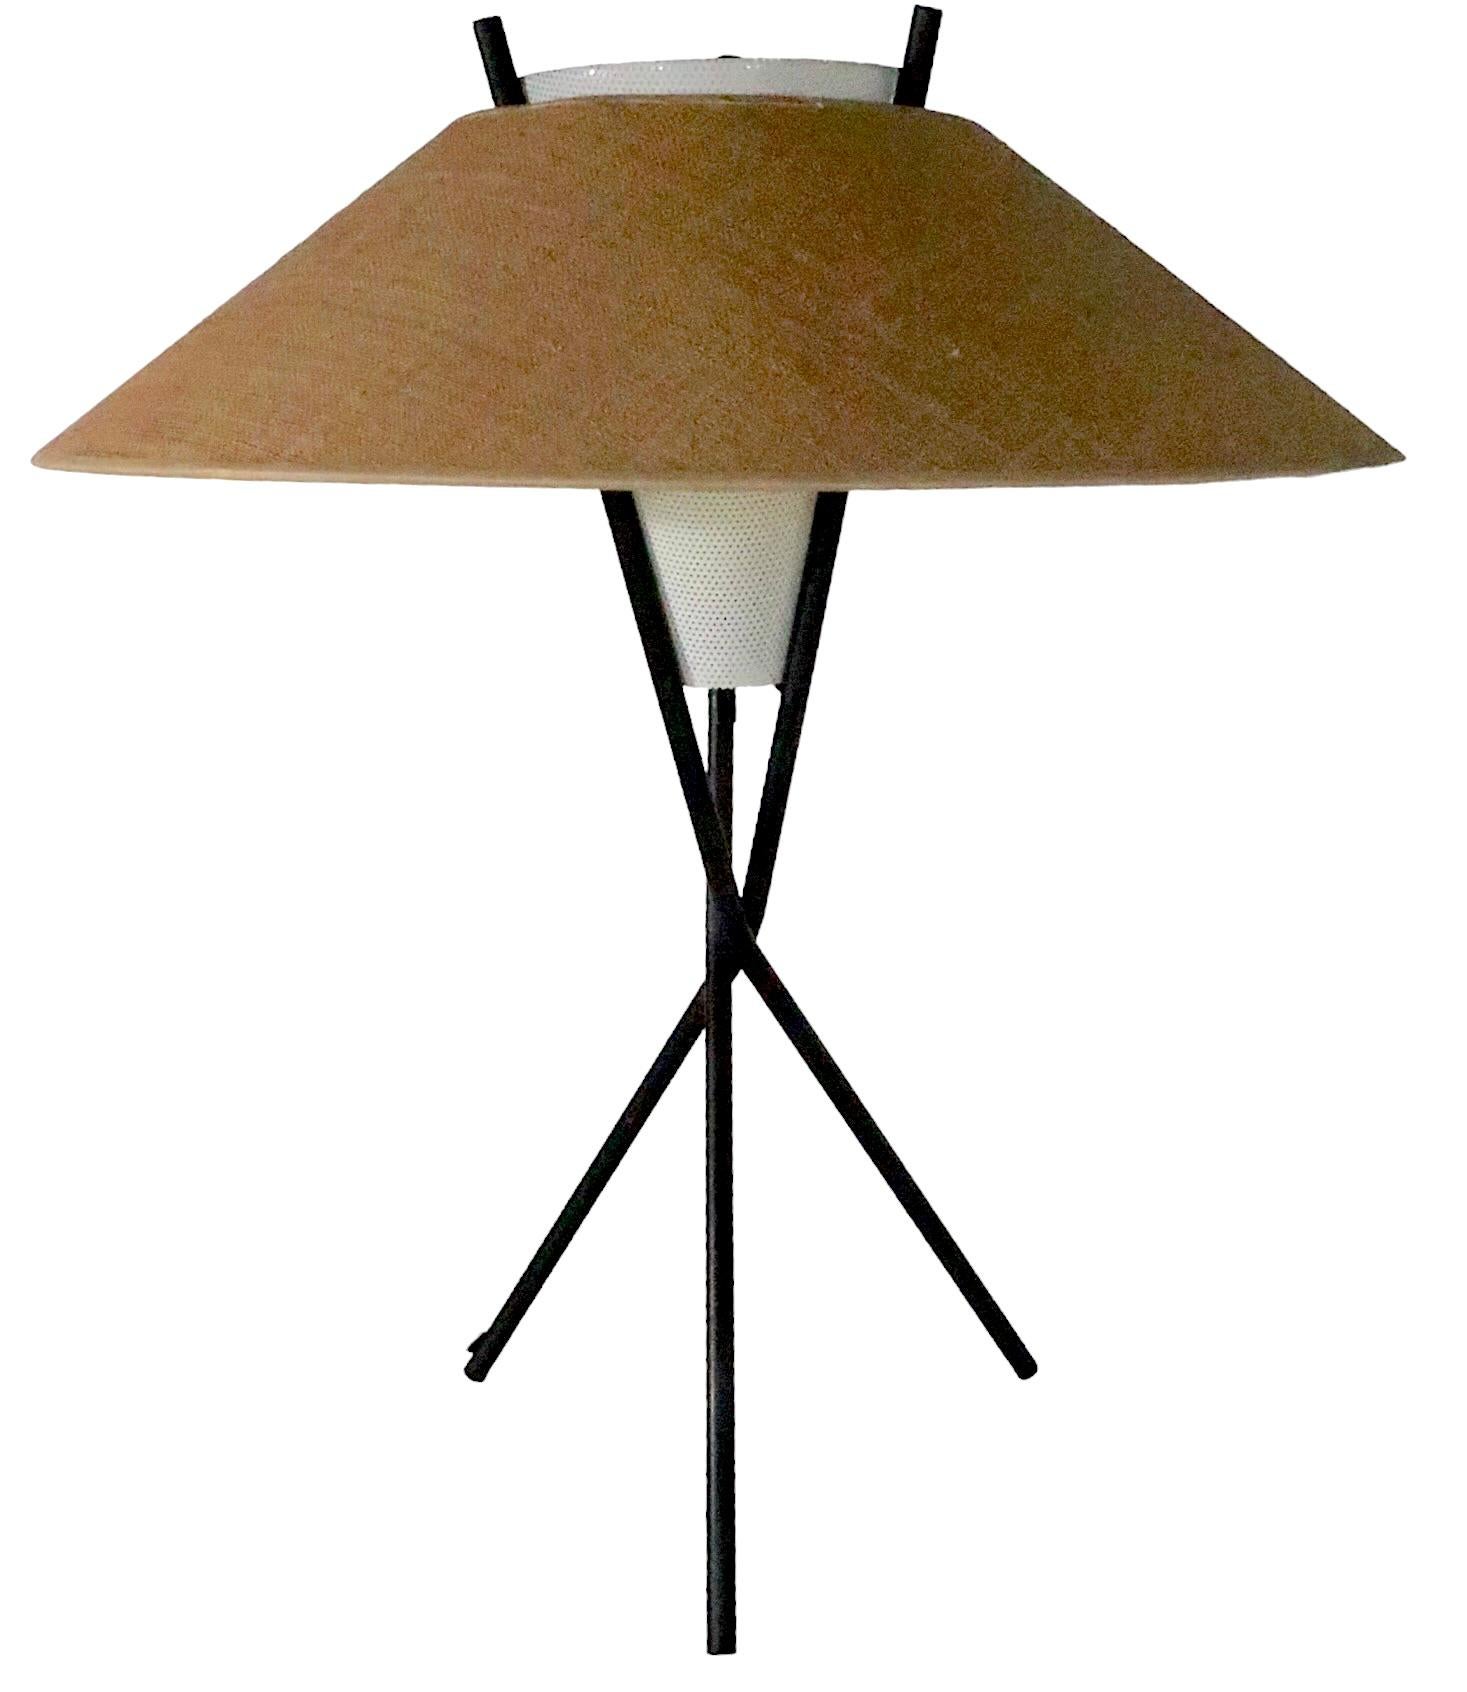 Midcentury Tri Pod Table Lamp by Gerald Thurston for Lightolier C 1950s For Sale 1